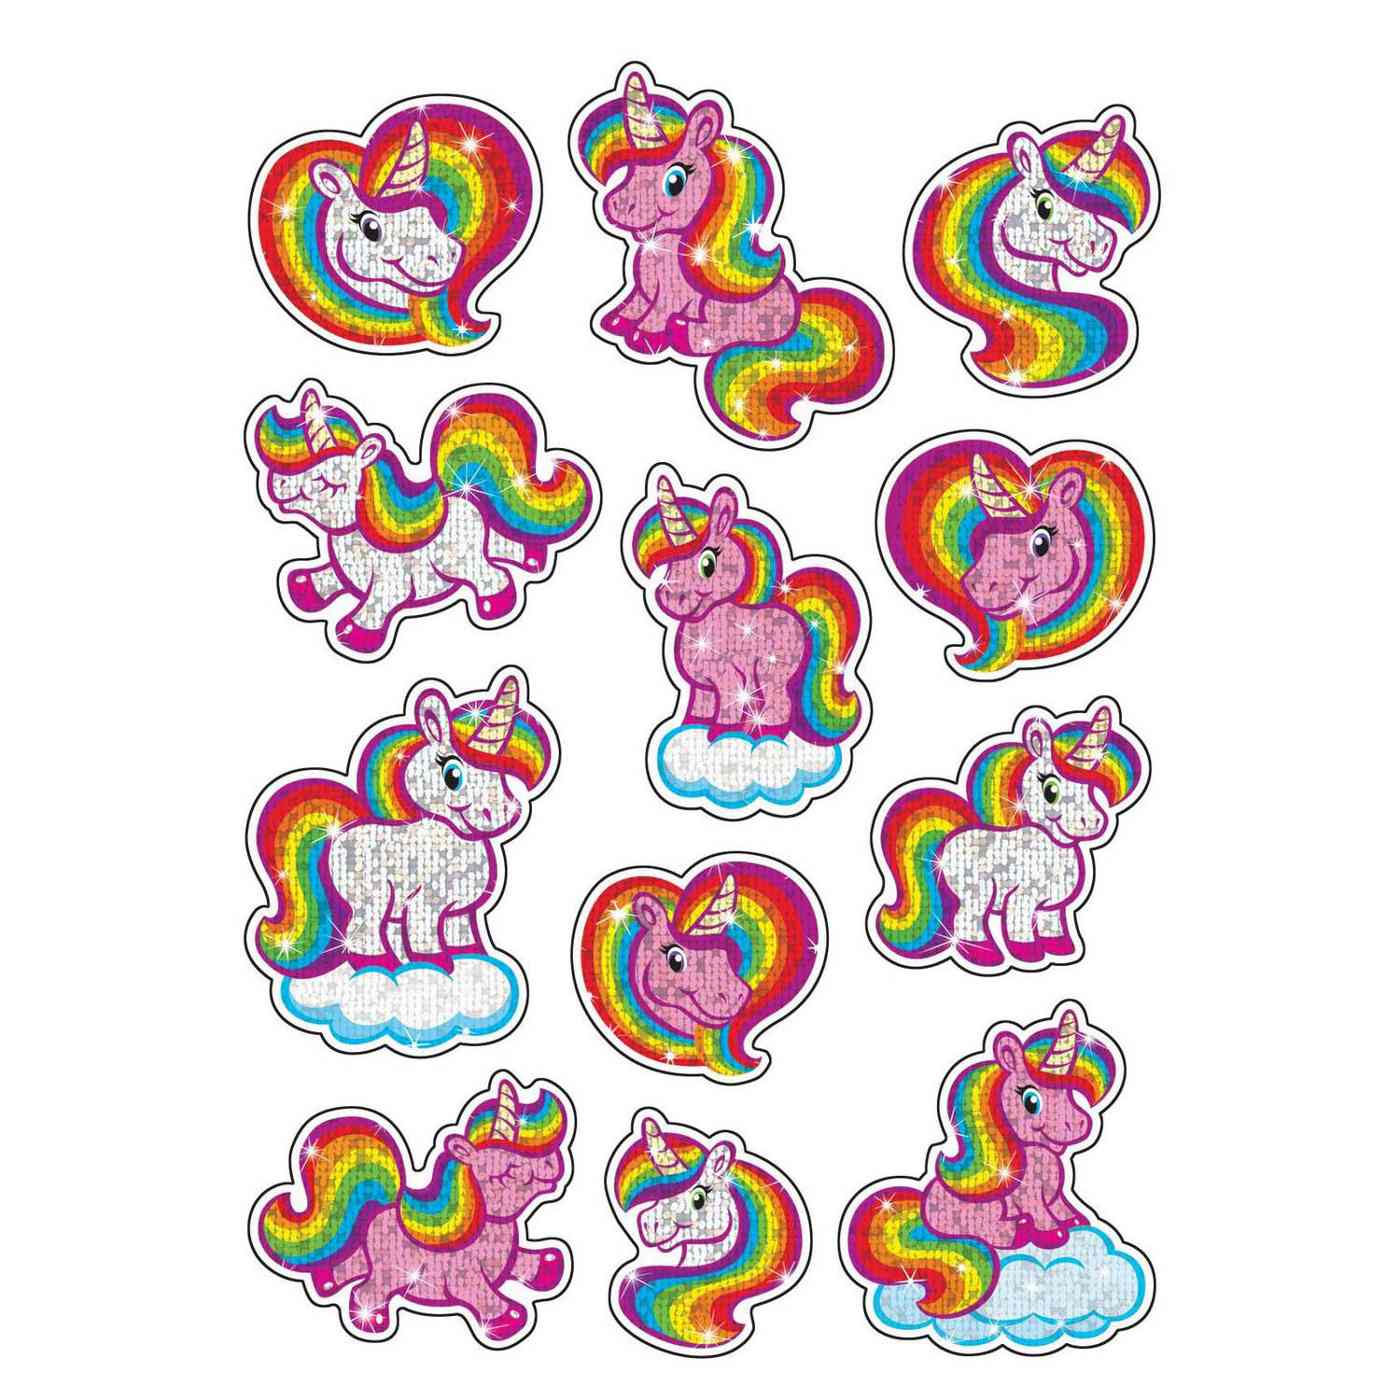 Trend Enterprises® Sparkly Space Stuff Sparkle STICKERS®, 6 Packs of 36